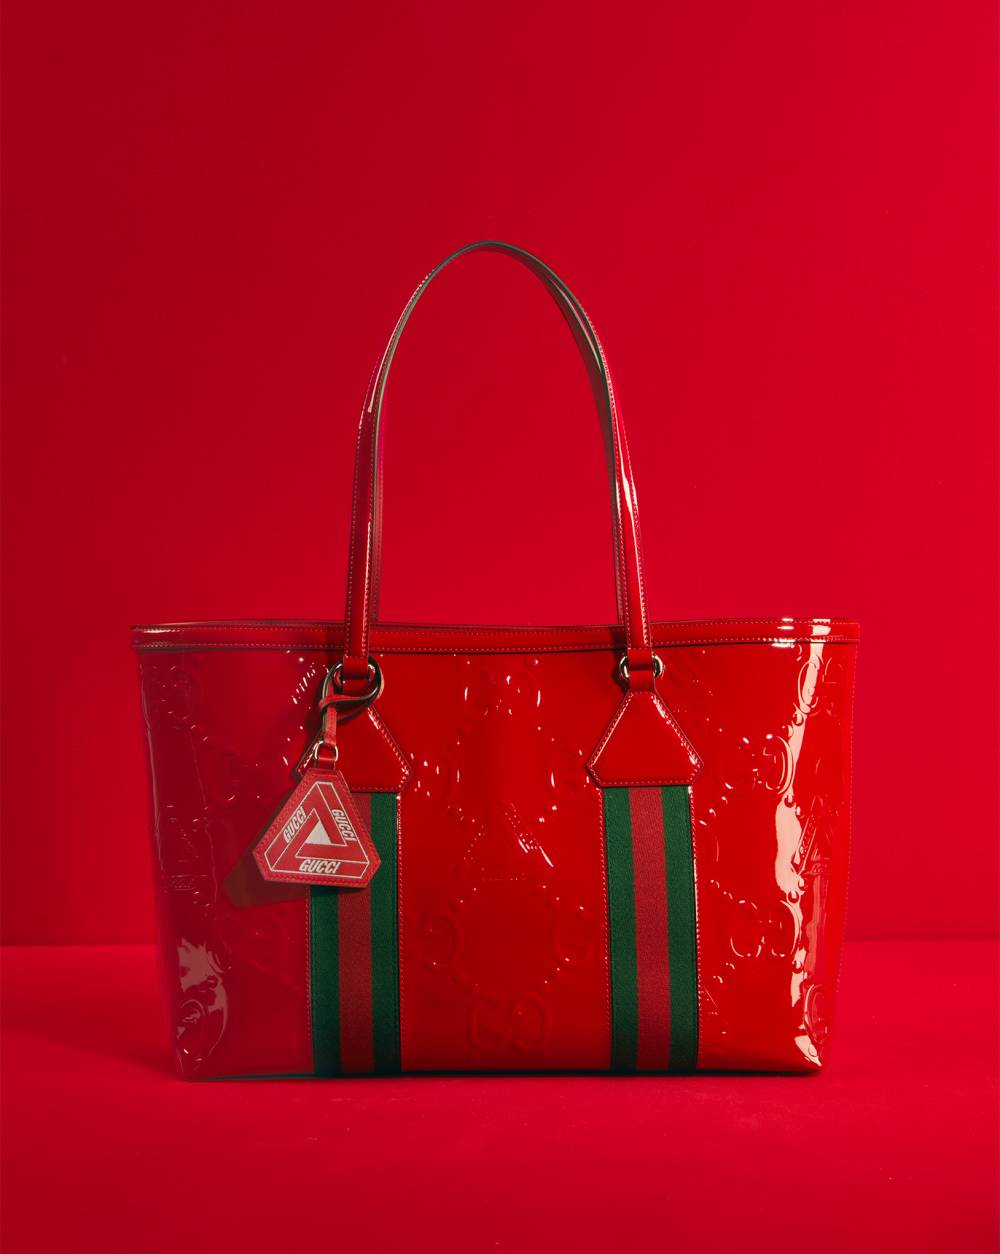 Embossed GG Jumbo patent leather tote bag by Palace Gucci